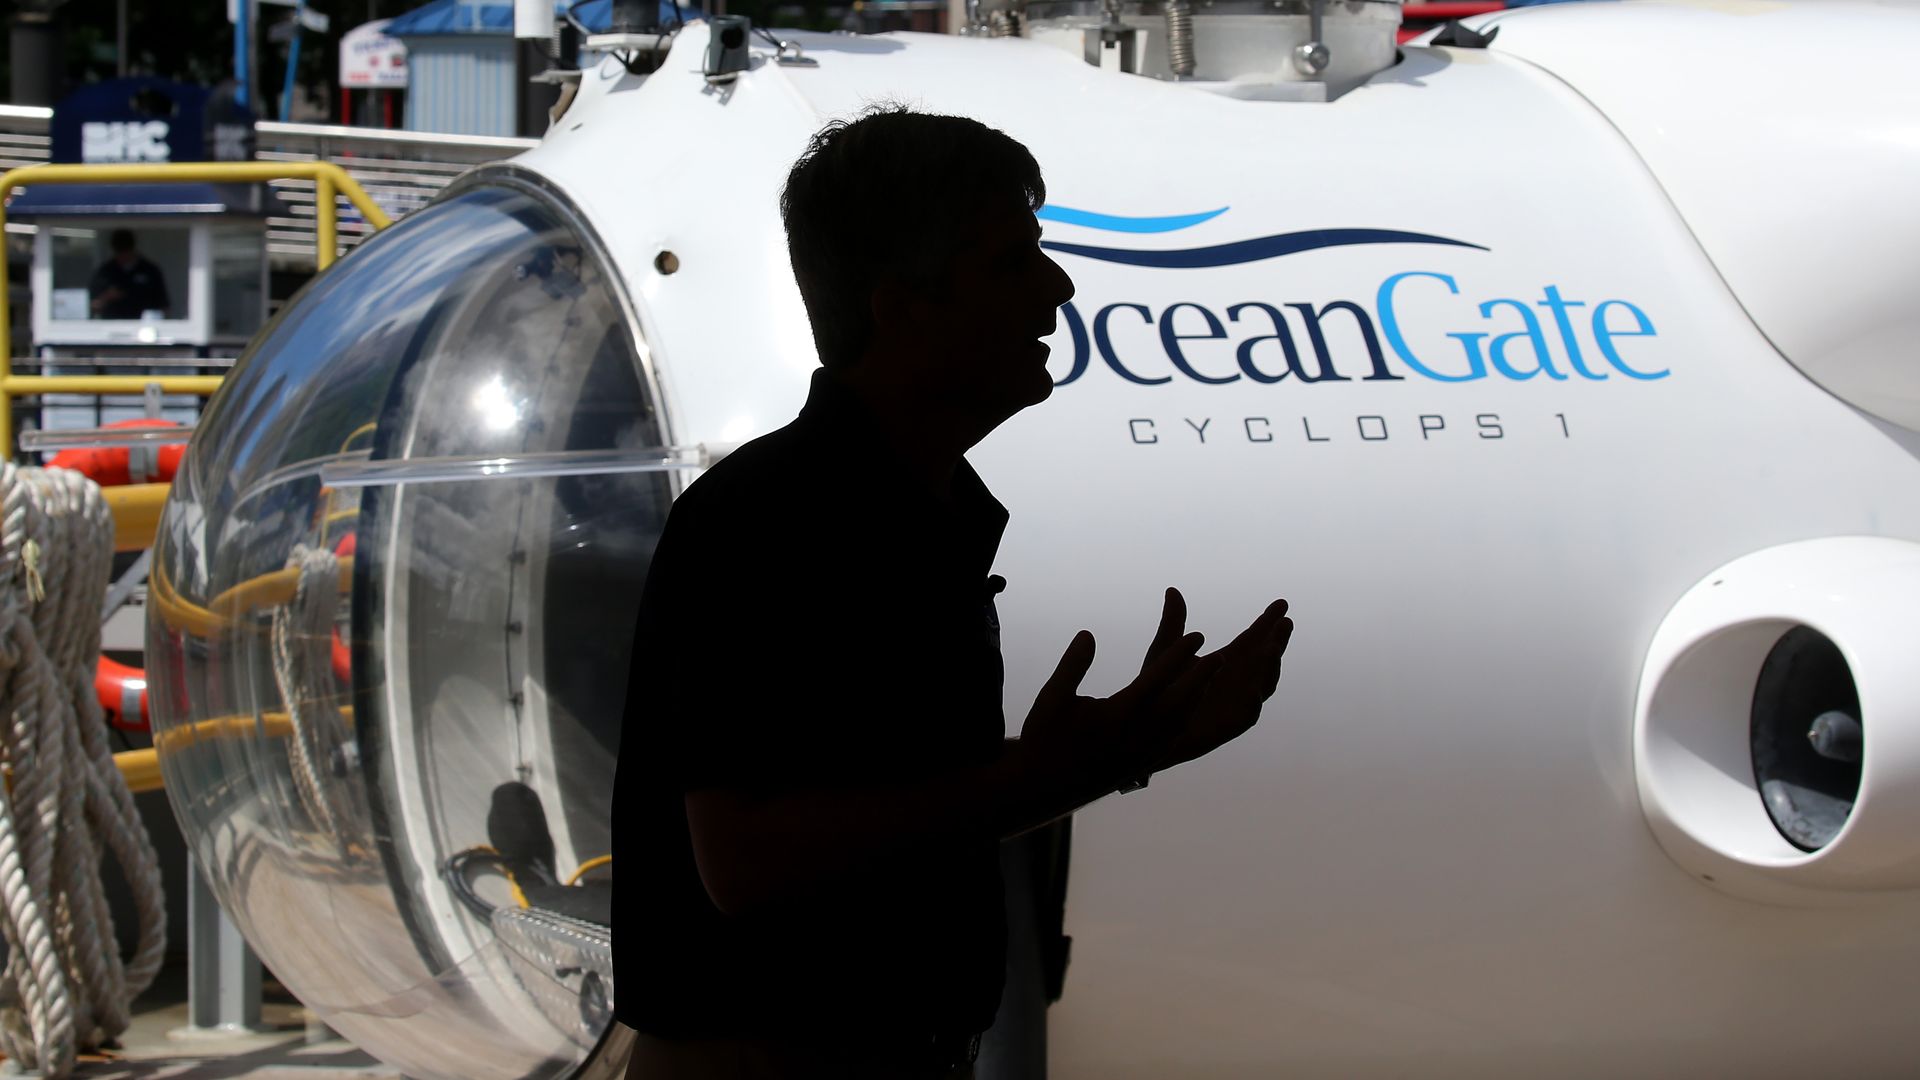 Stockton Rush, OceanGates chief executive, spoke at a press conference said during a press conference next to the Cyclops 1, a five-person sub that was used by OceanGate to capture detailed sonar images of the Andrea Doria shipwreck.